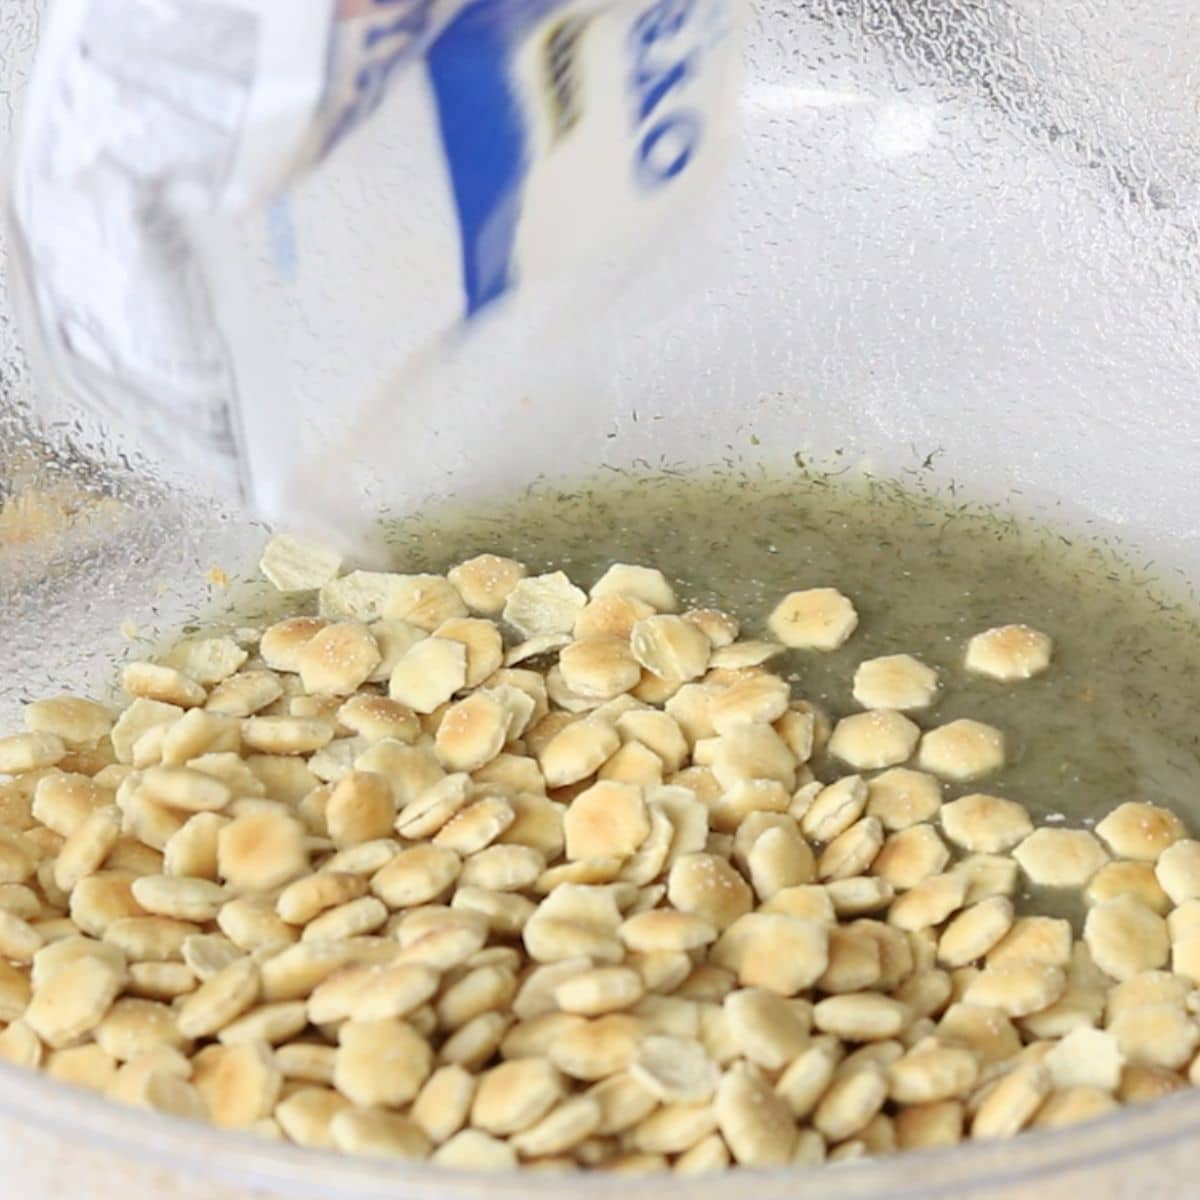 Oyster crackers being poured into a seasoning mixture